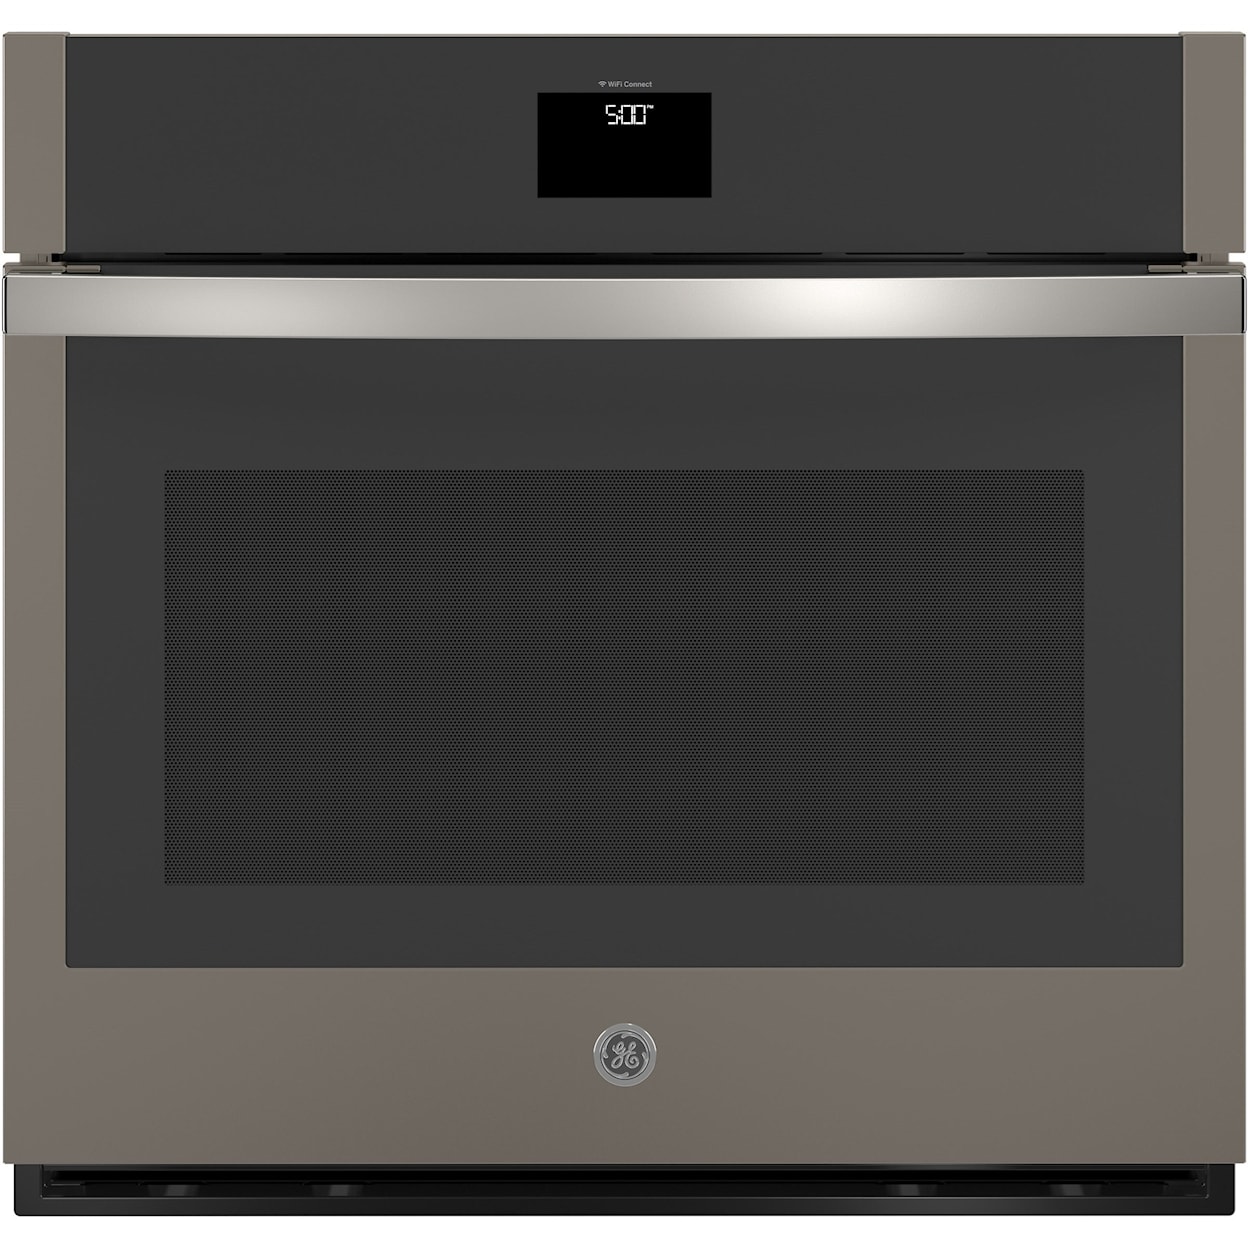 GE Appliances Electric Wall Oven 5 Cu. Ft. 30" Smart Built-In Convection Oven